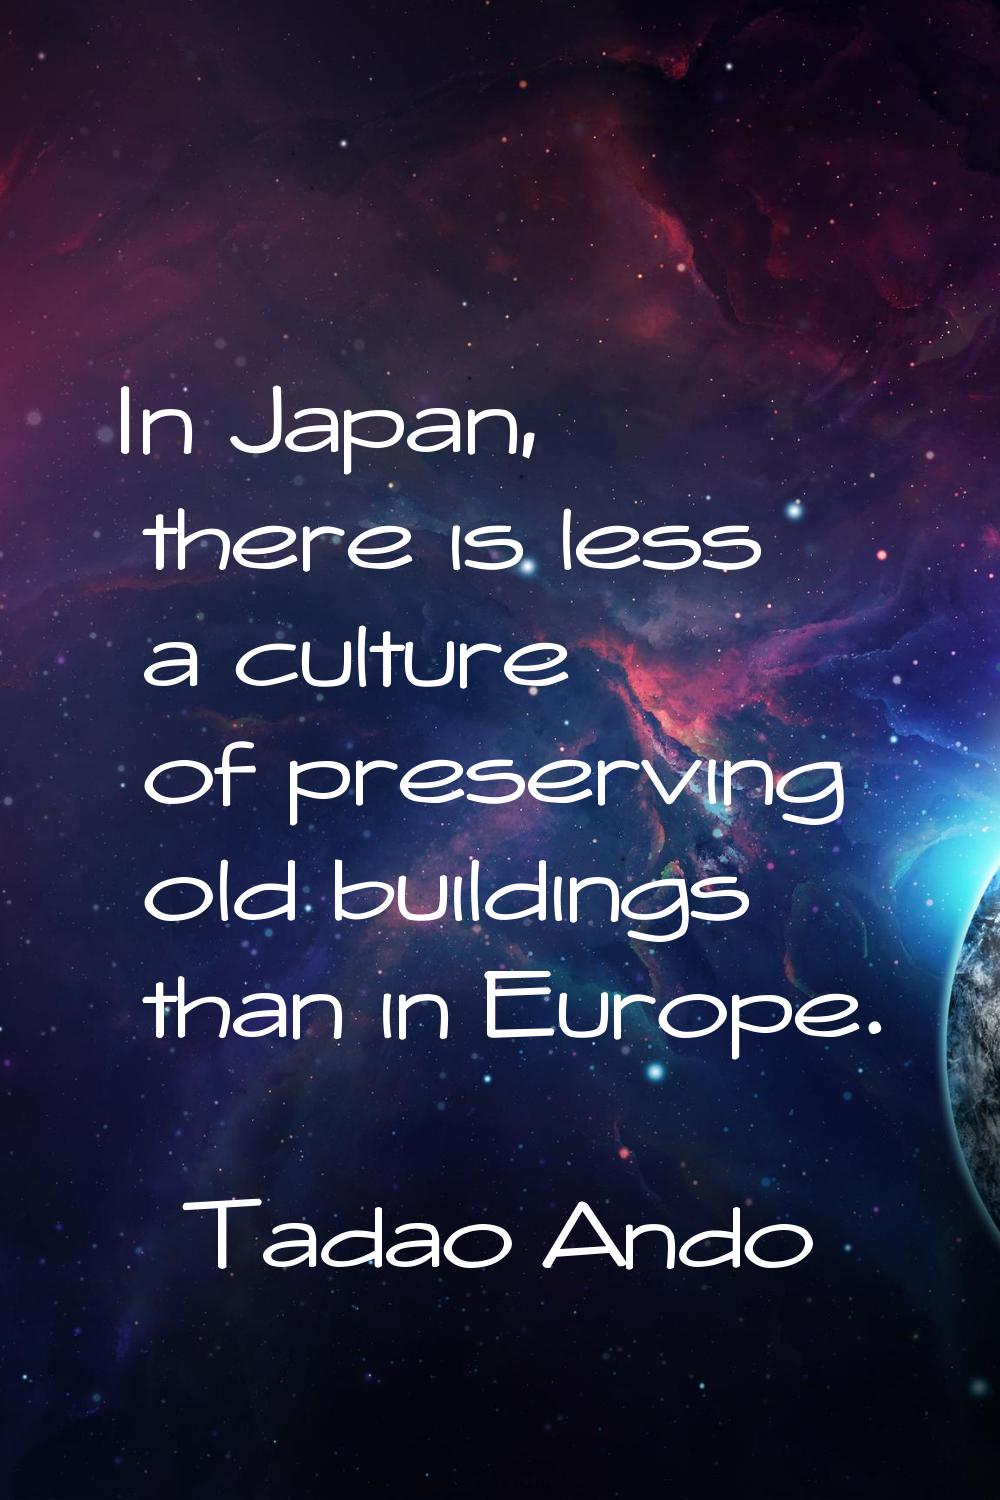 In Japan, there is less a culture of preserving old buildings than in Europe.